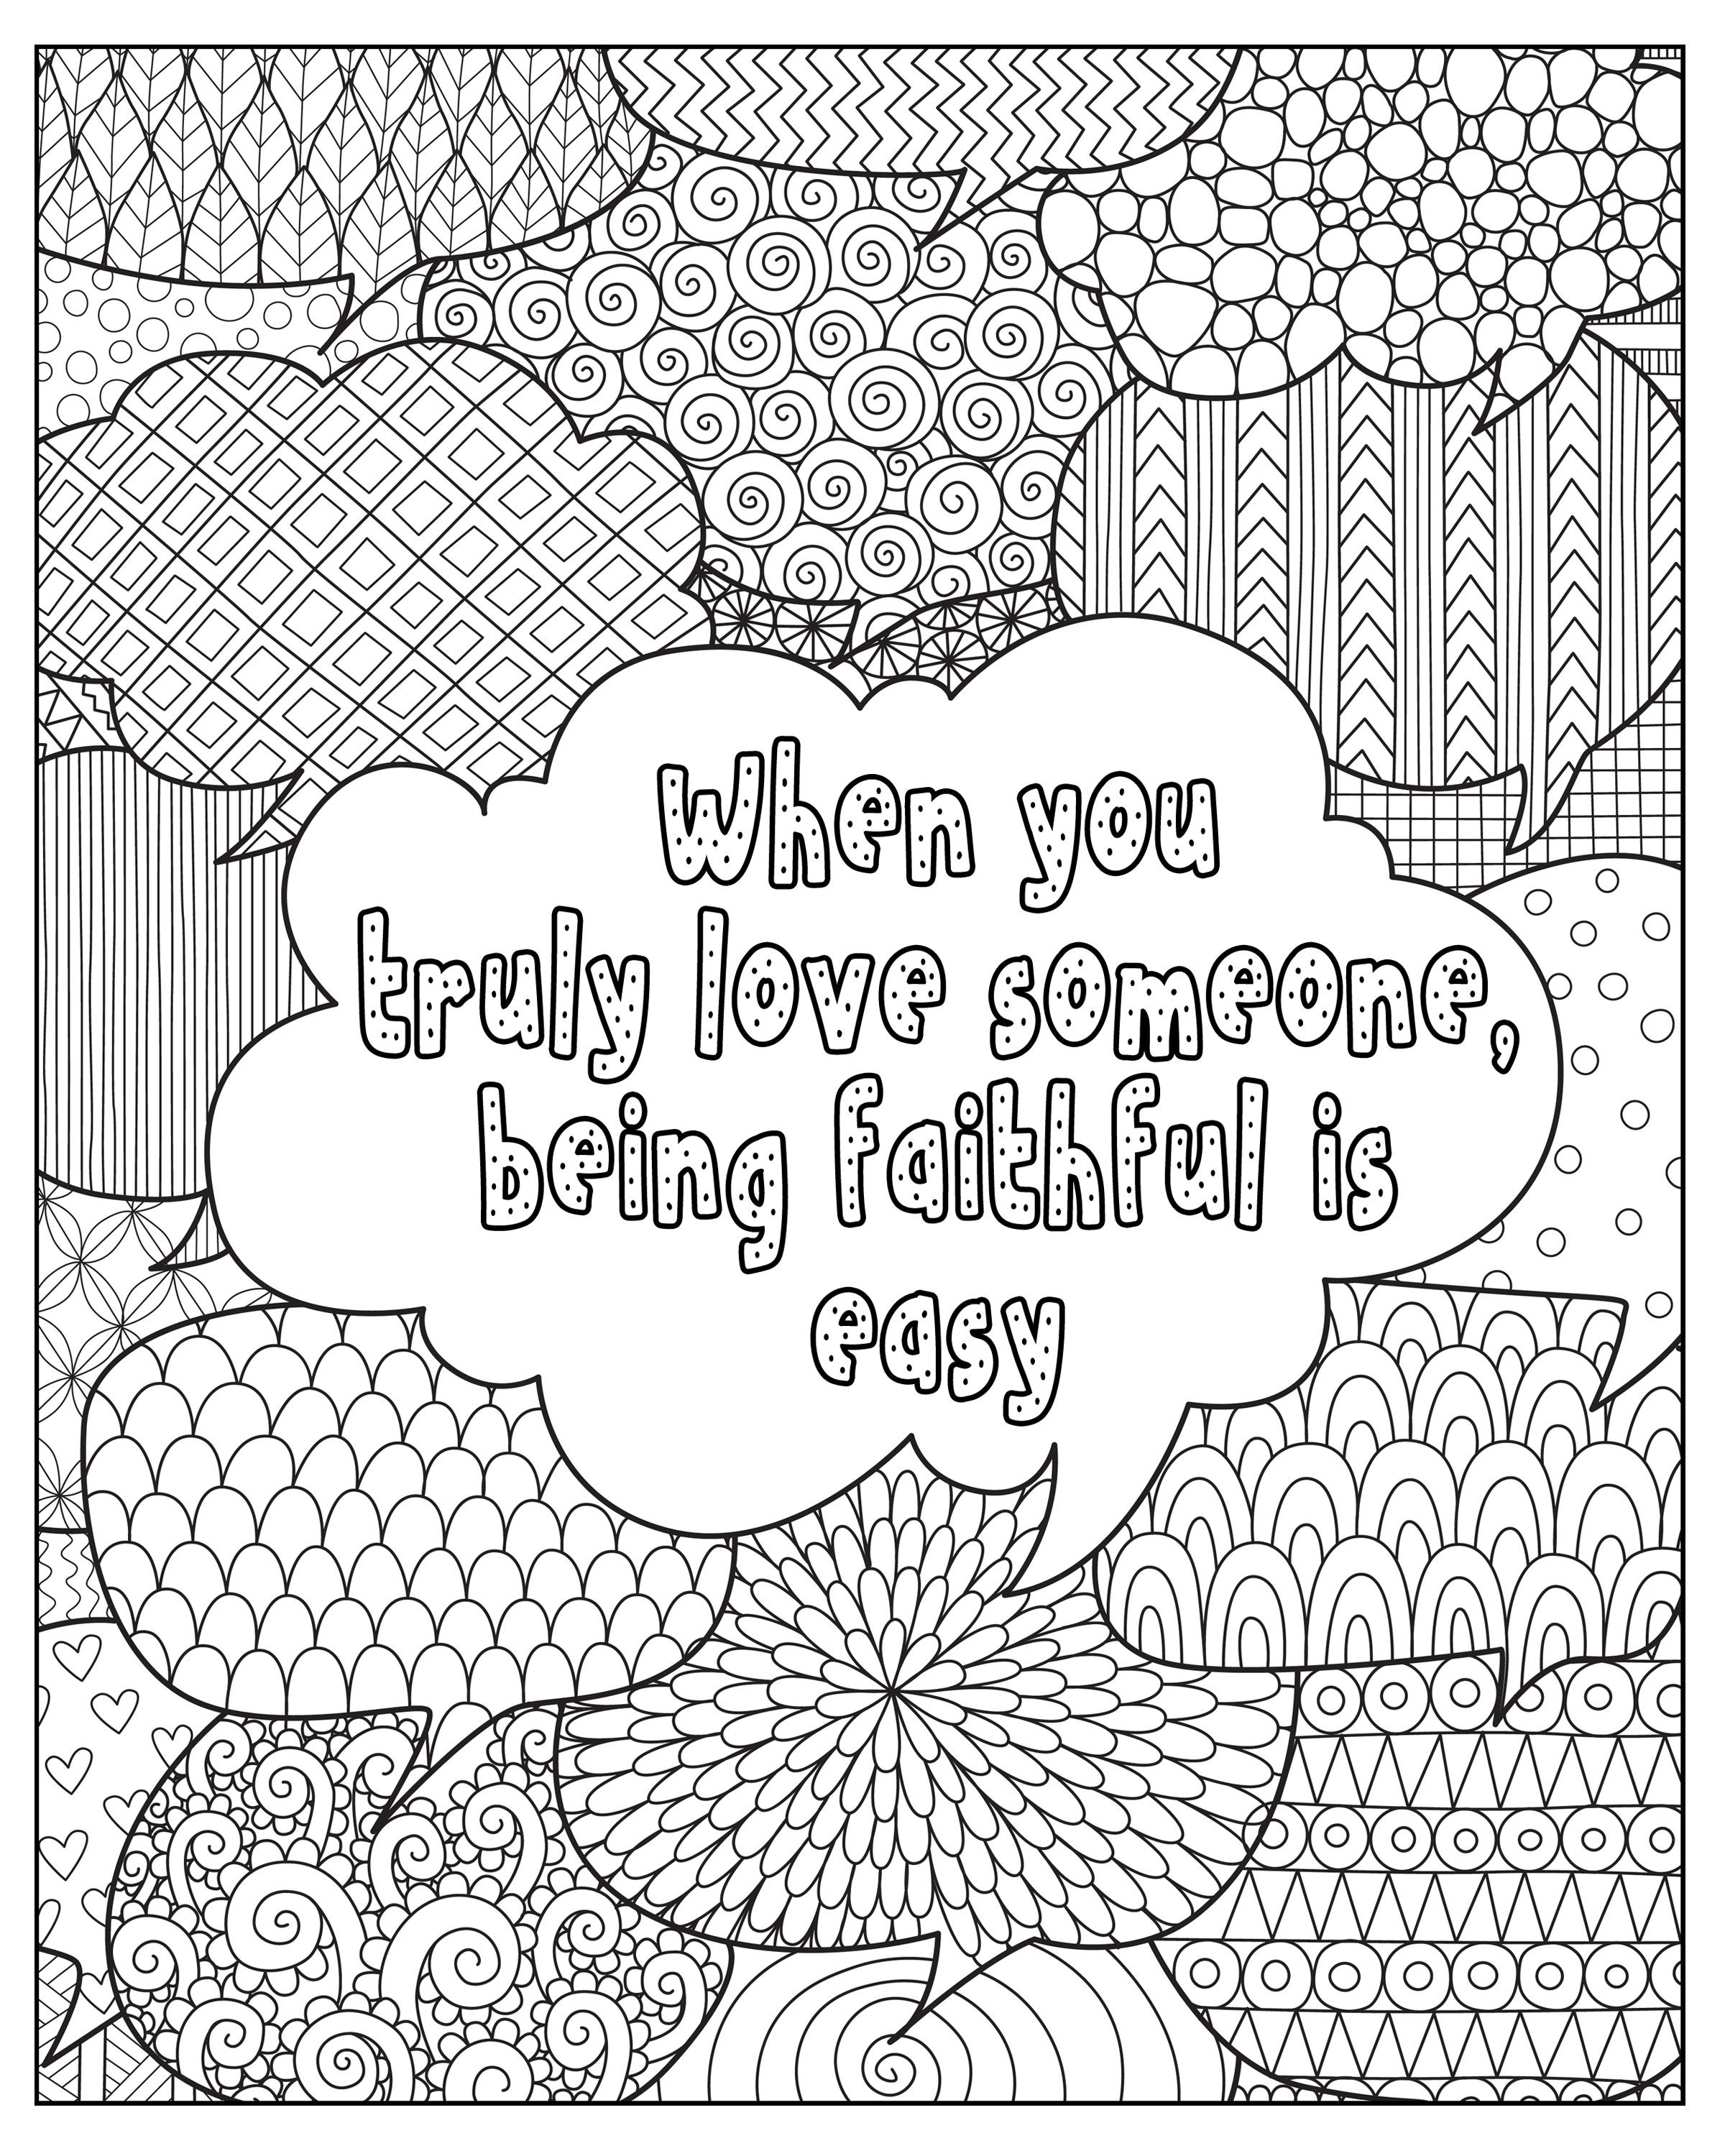 Inspirational Motivational Quotes Coloring Page Bundle For Adults.  Printable Coloring Sheets. Digital Colouring Download. Sayings Printable